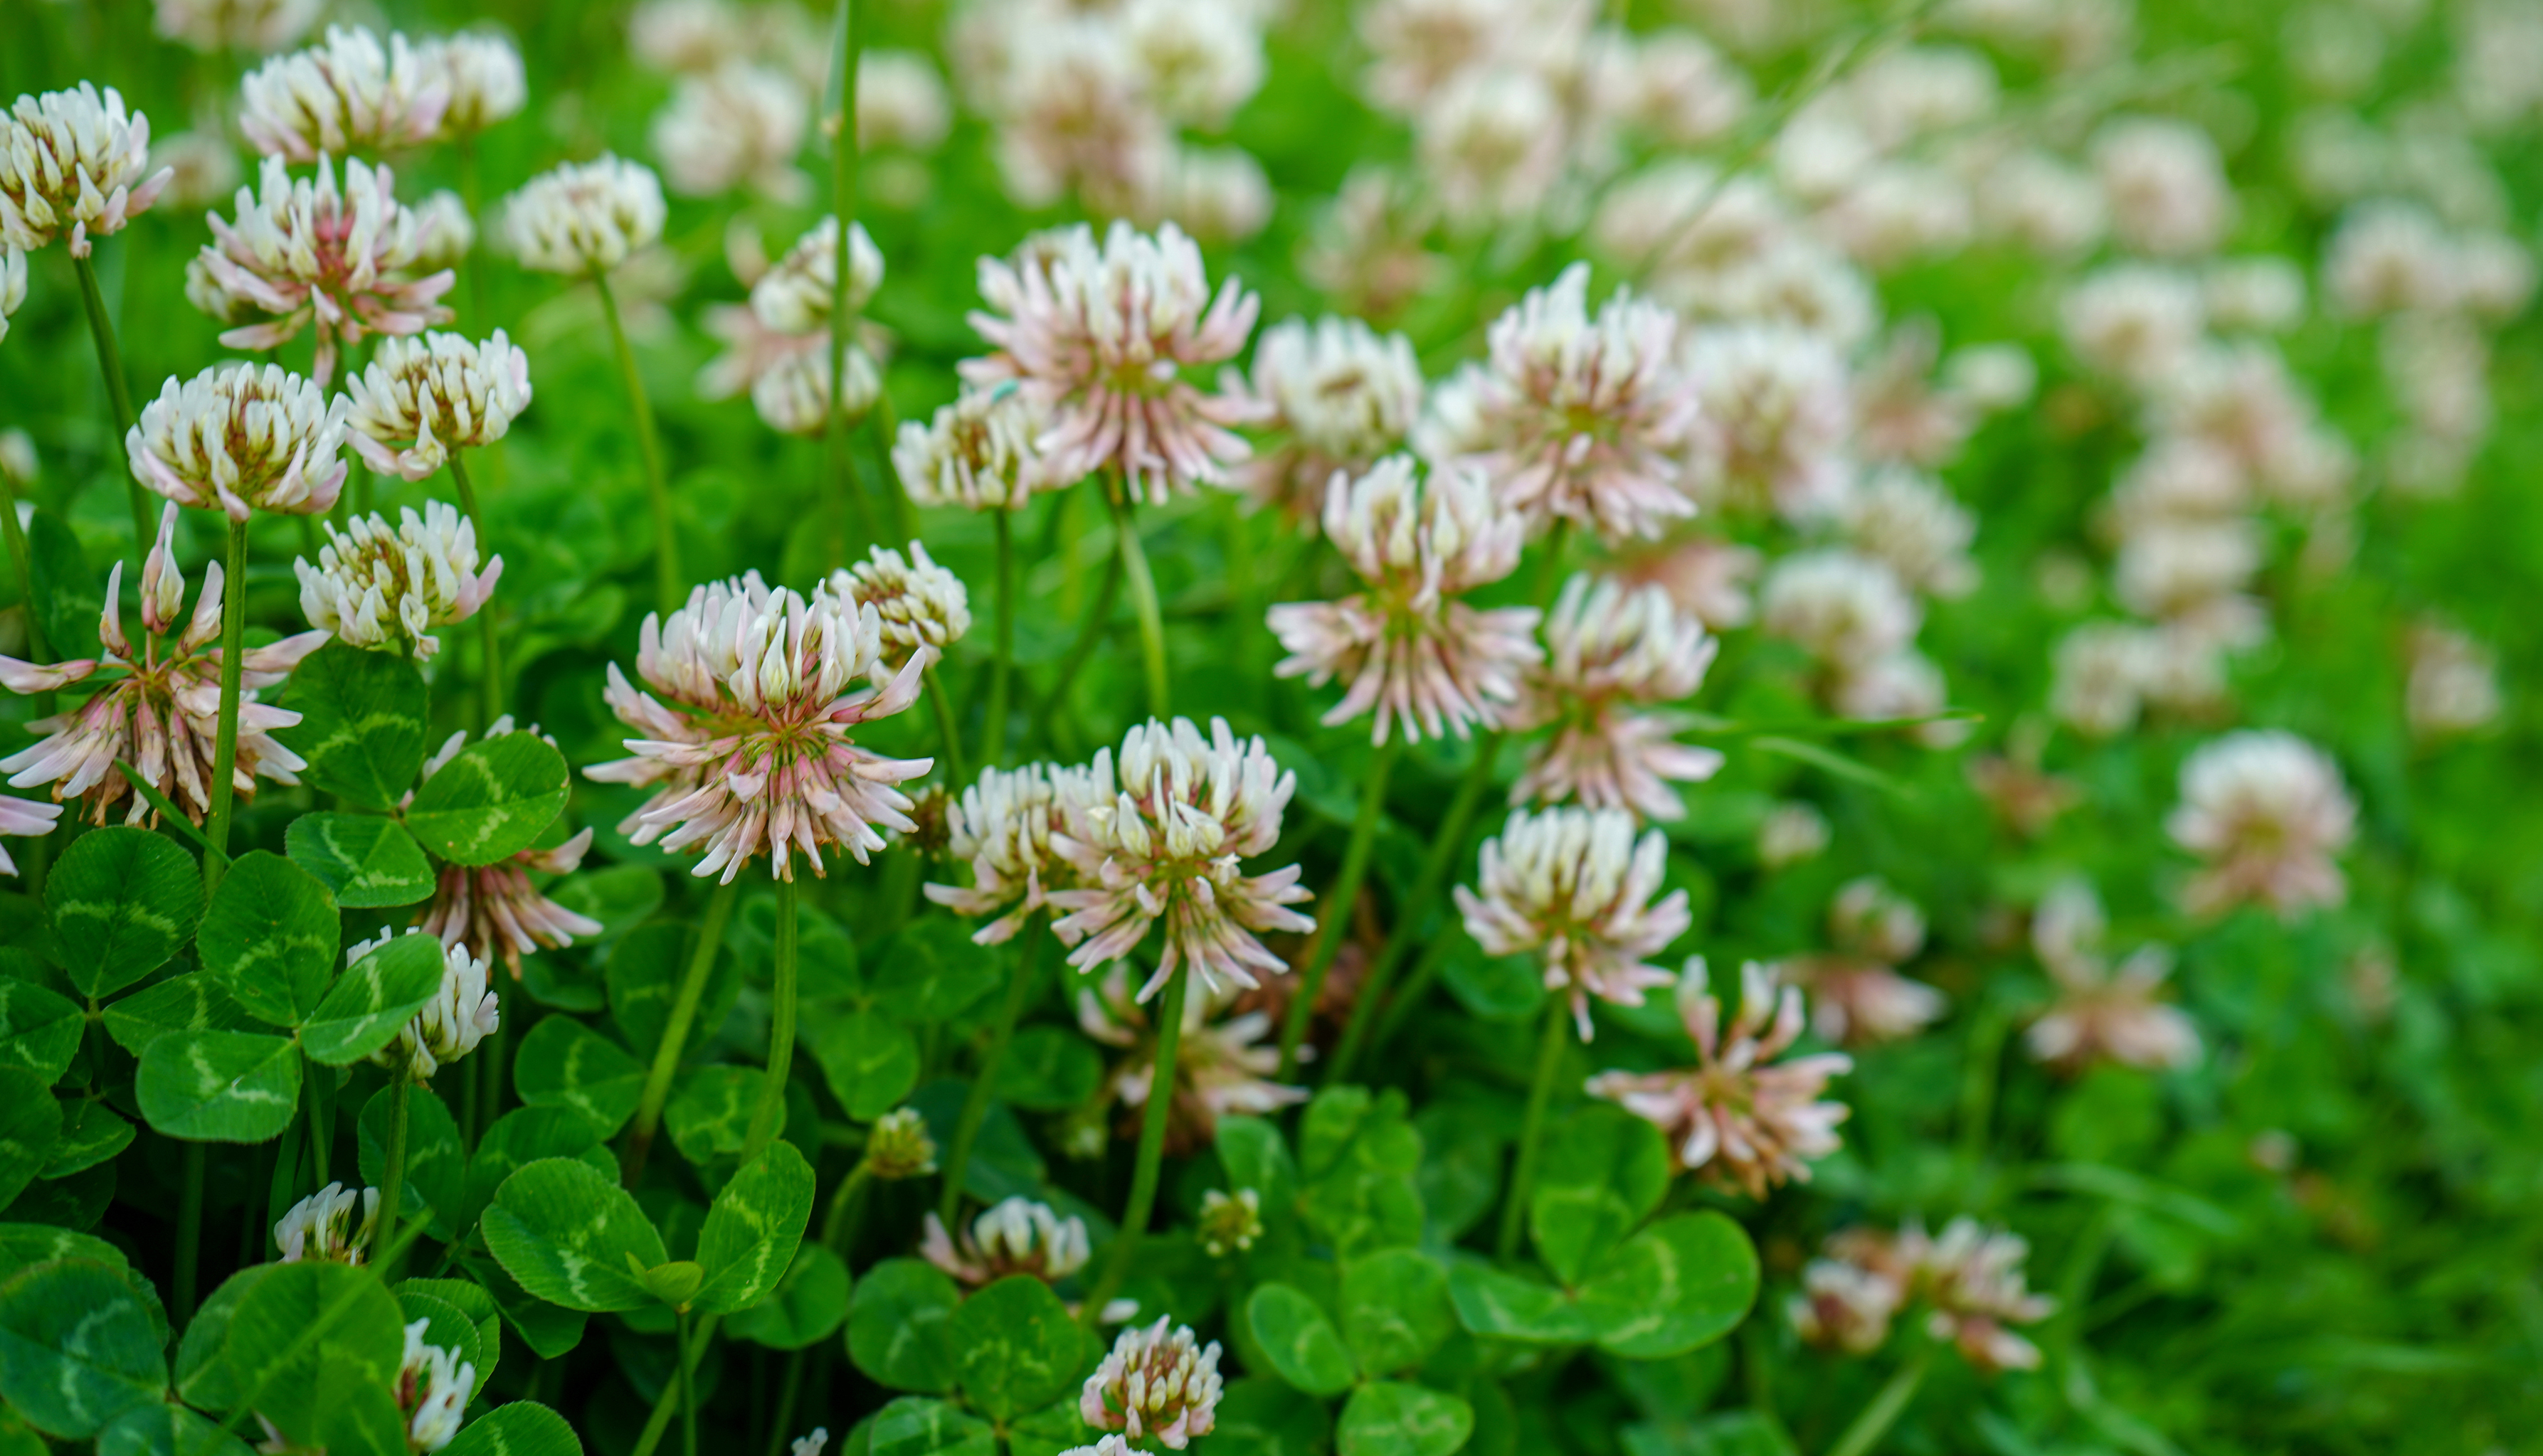 Clover lawn (iStock/PA)